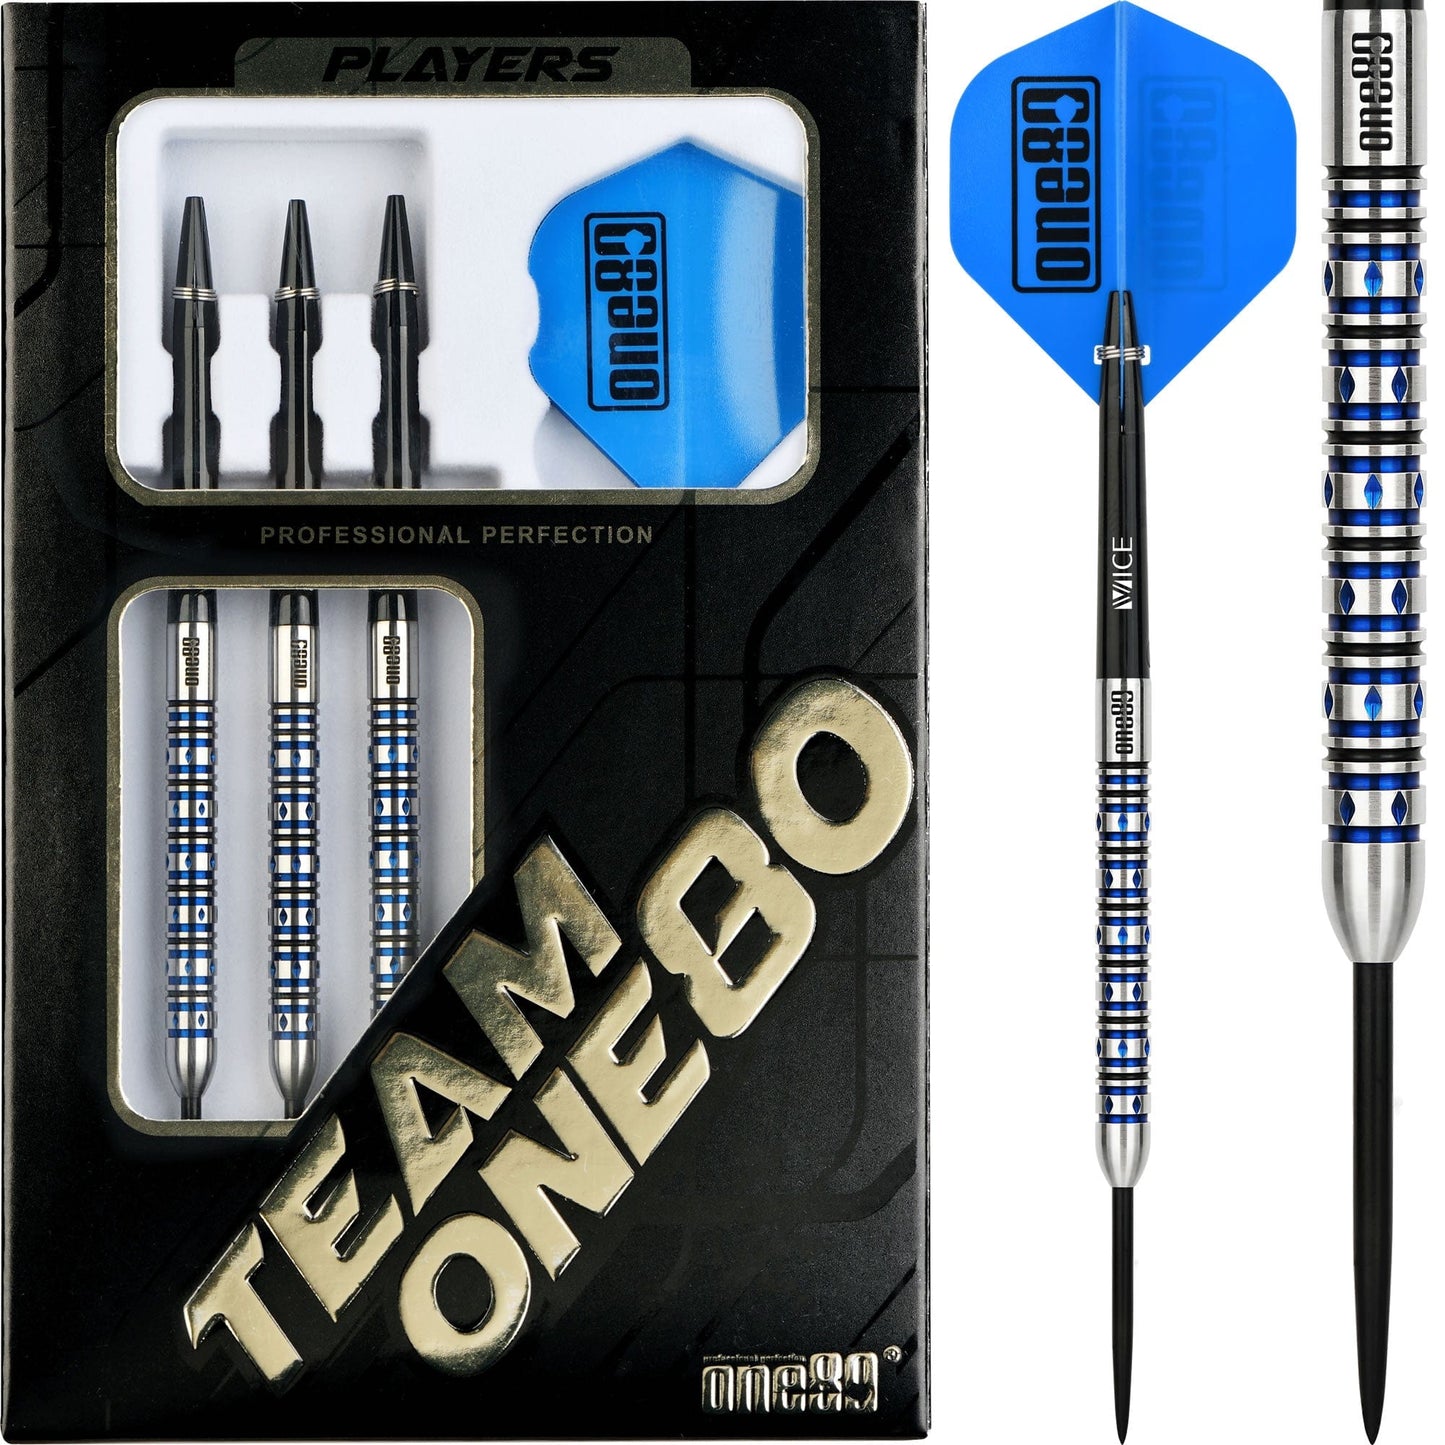 One80 Alexis Toylo Darts - Steel Tip - Cool Cat - Blue - 22g 22g